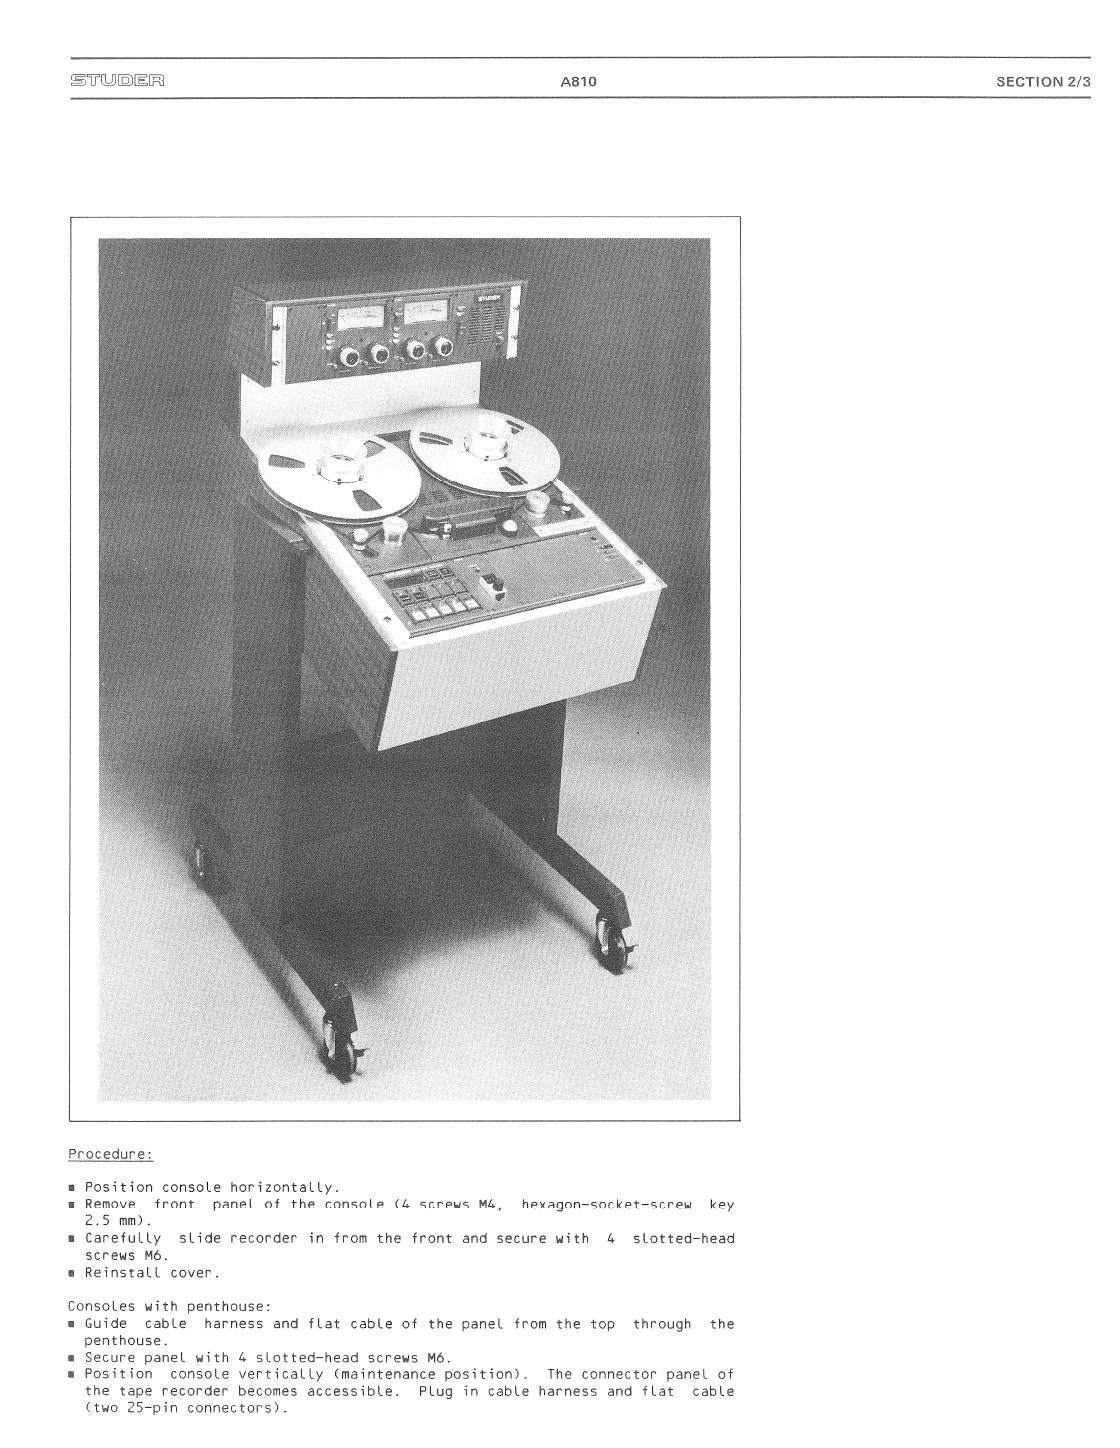 Operating and Service Instructions for Studer A810